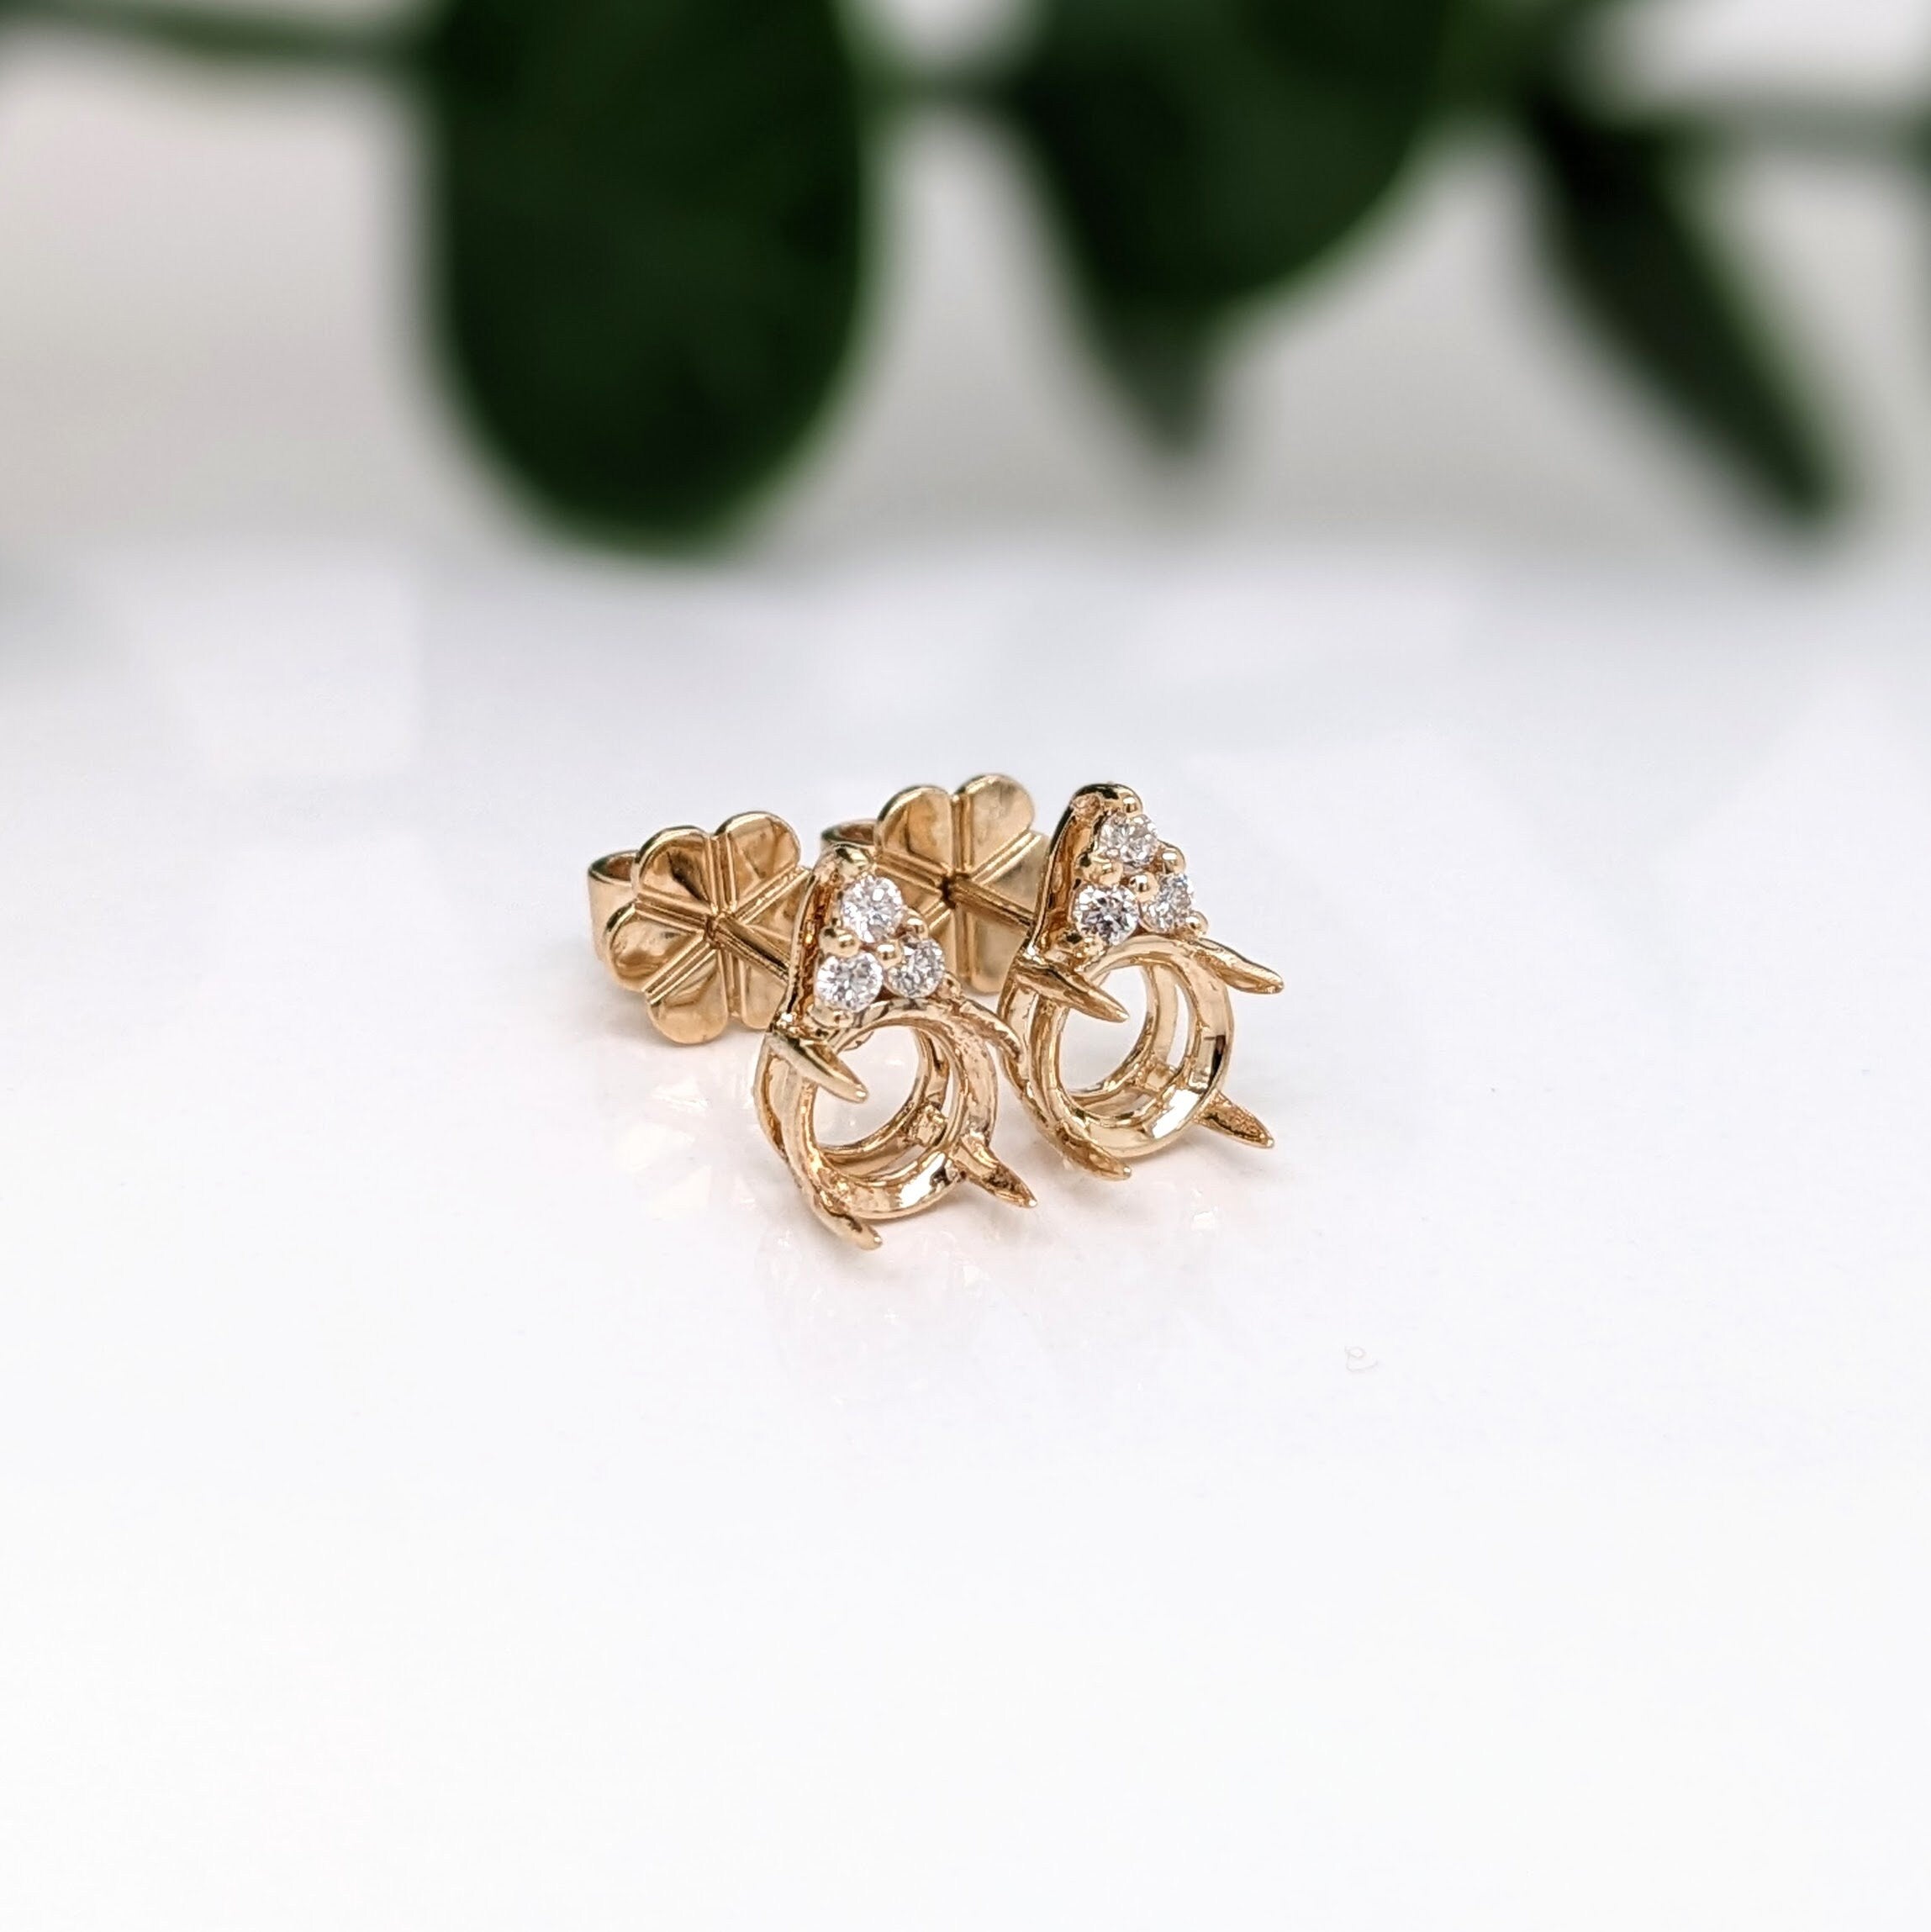 Stud Earrings-Round Stud Earring Semi-Mount Accented with 3 Diamonds with Secure Push Back in 4mm, 5mm, 6mm, 7mm in 14k Solid White, Rose, or Yellow Gold - NNJGemstones